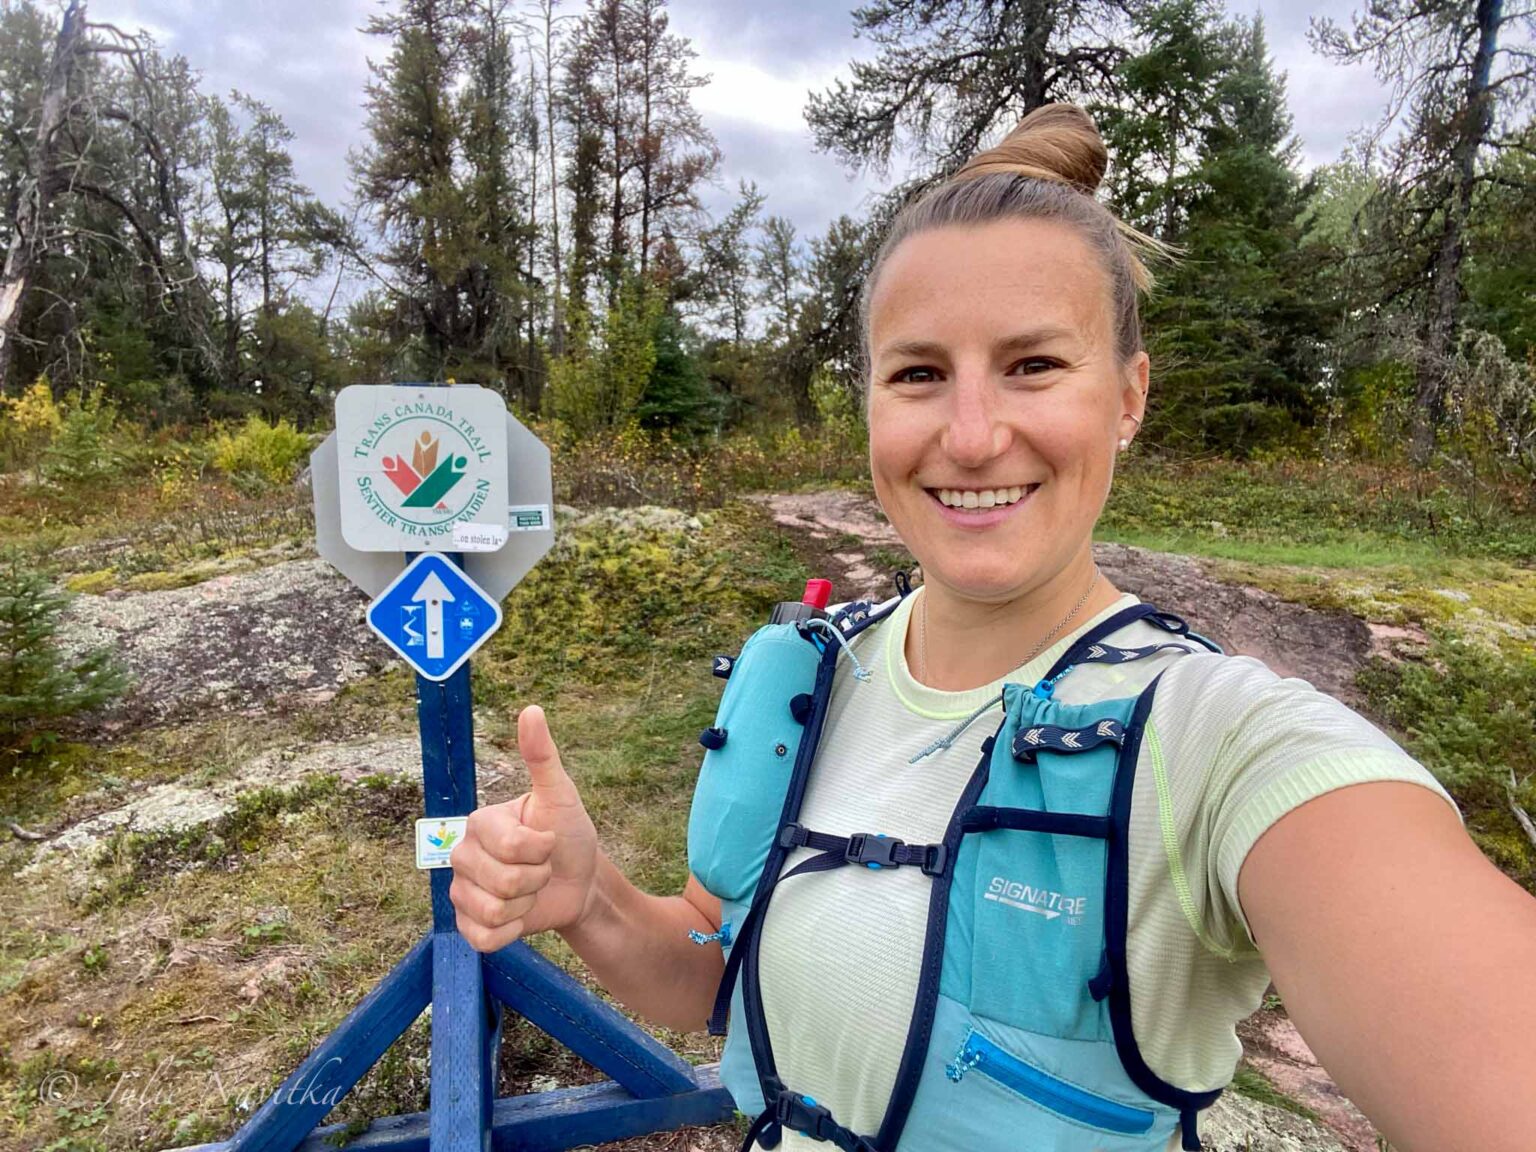 Image of a trail runner wearing a running vest gives a thumbs up next to a trail sign in Whiteshell Provincial Park, Manitoba, Canada. Choosing quality hiking and running gear is important when it comes to sustainable recreation.